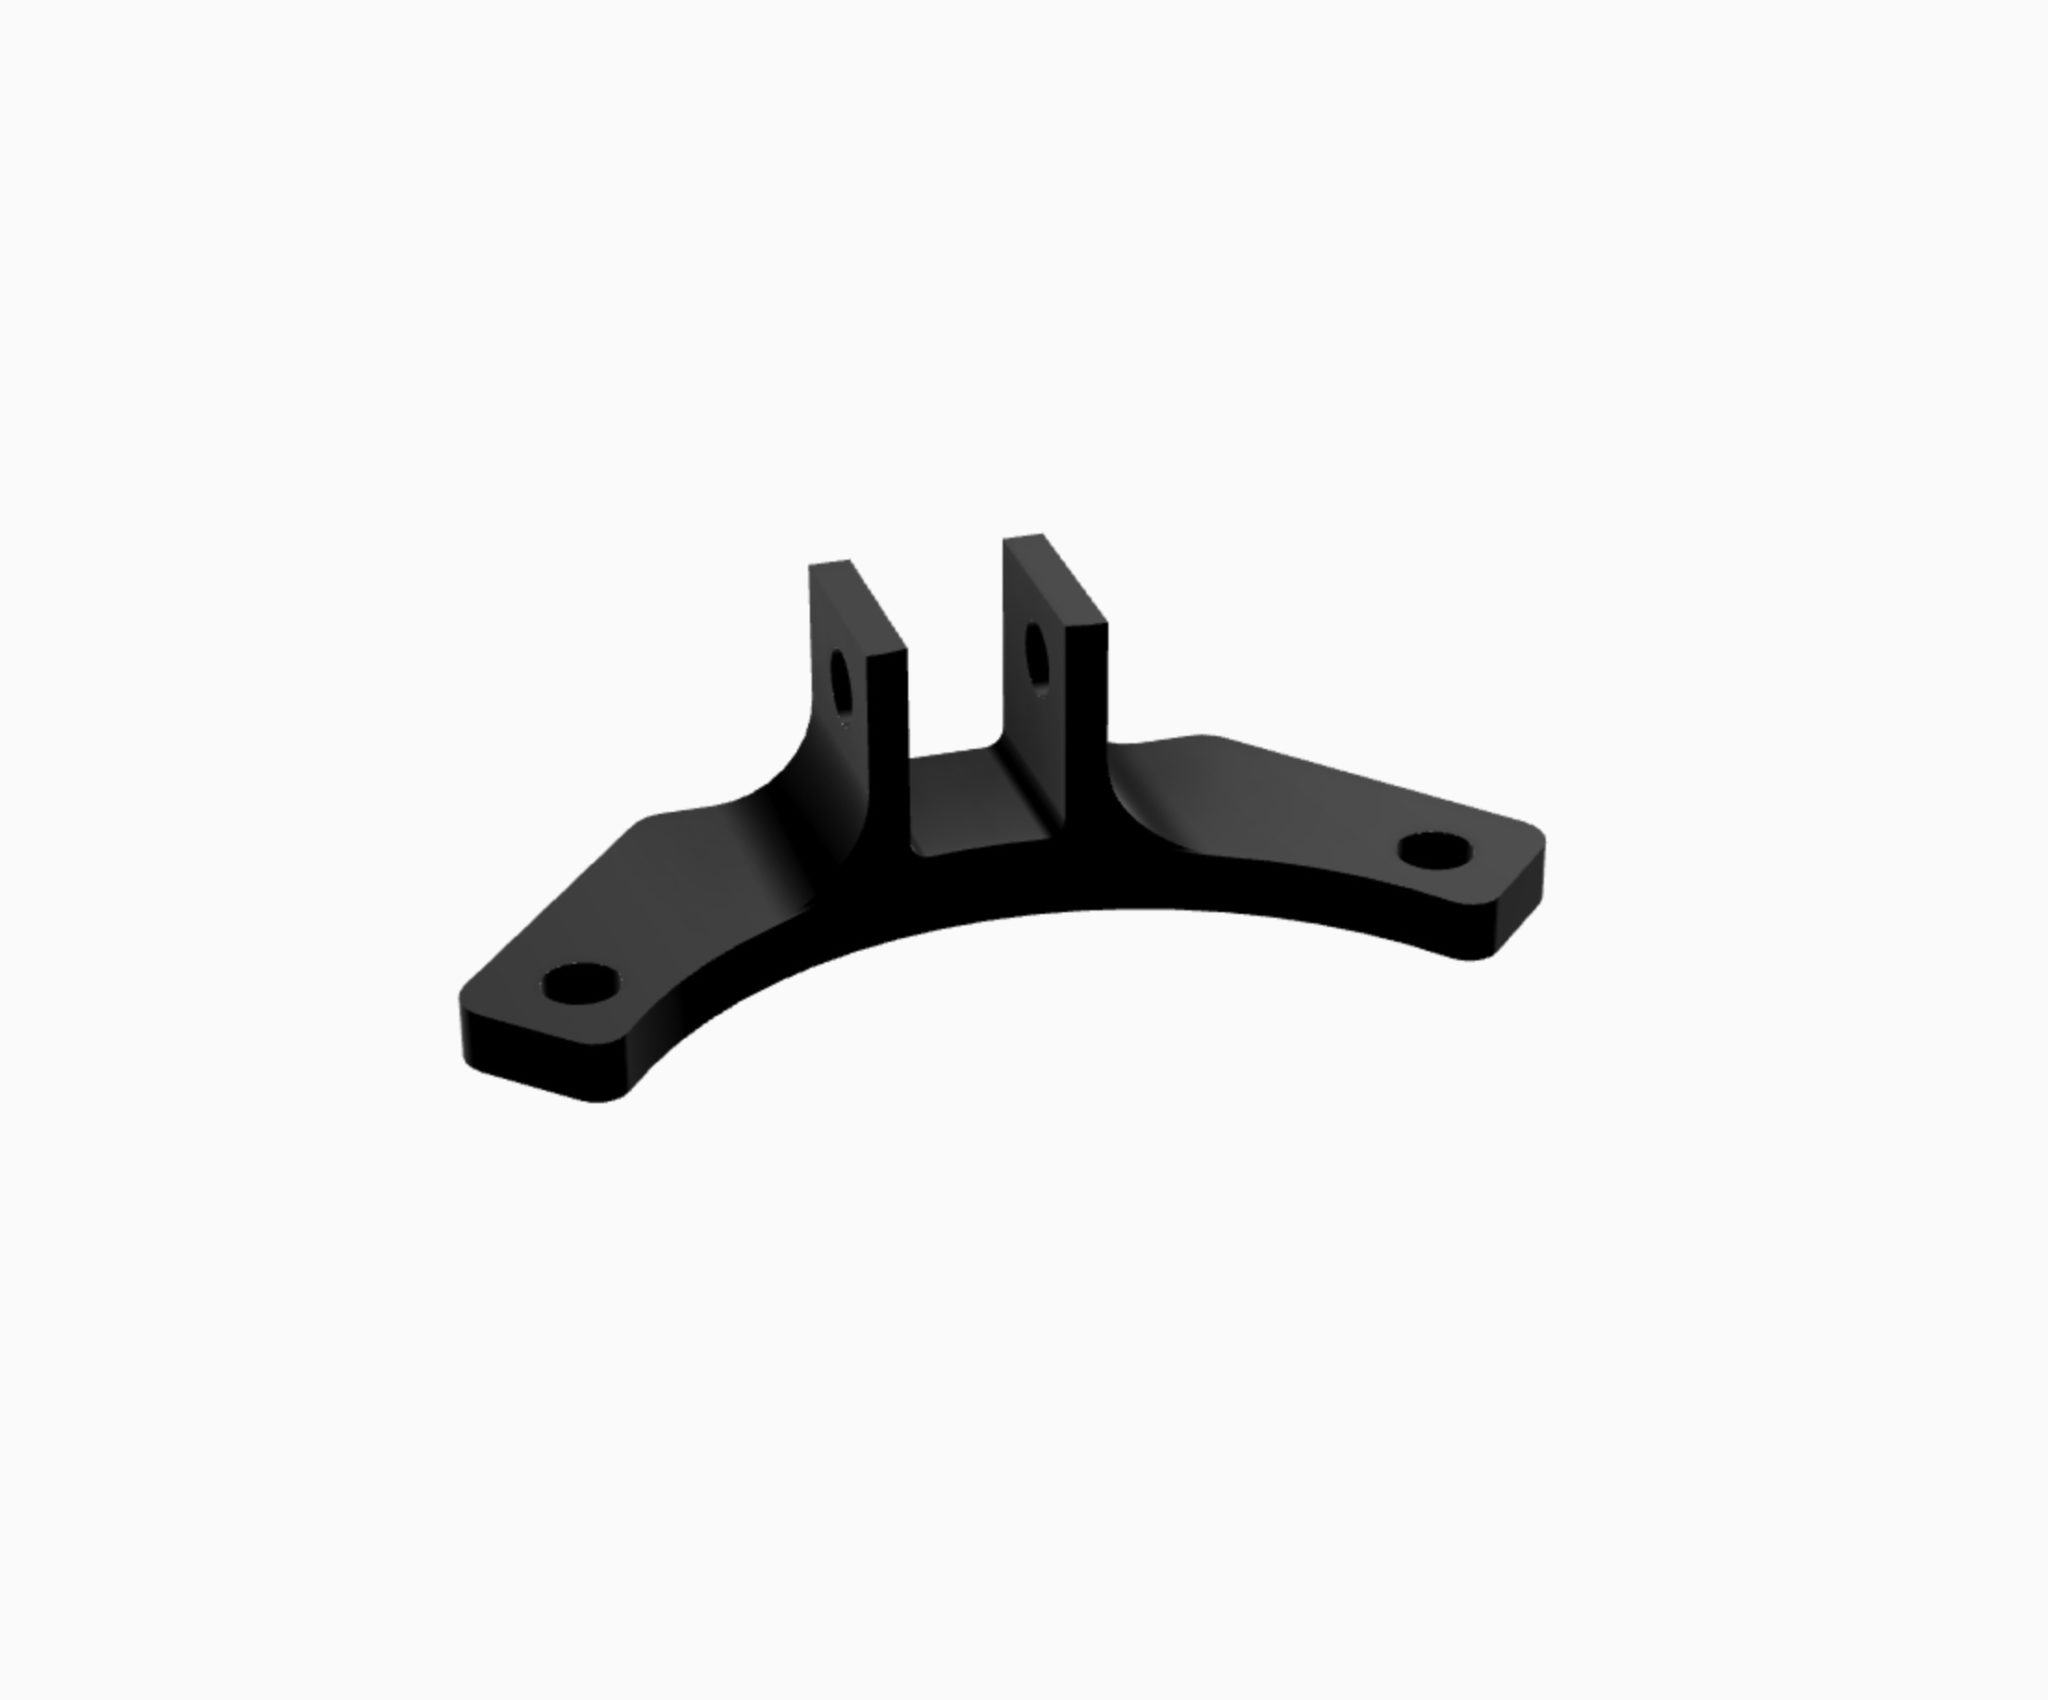 Lowrance TRIPLESHOT Quick Mount Transducer Bracket for Wilderness RECON 120  HD by YAK Hobby